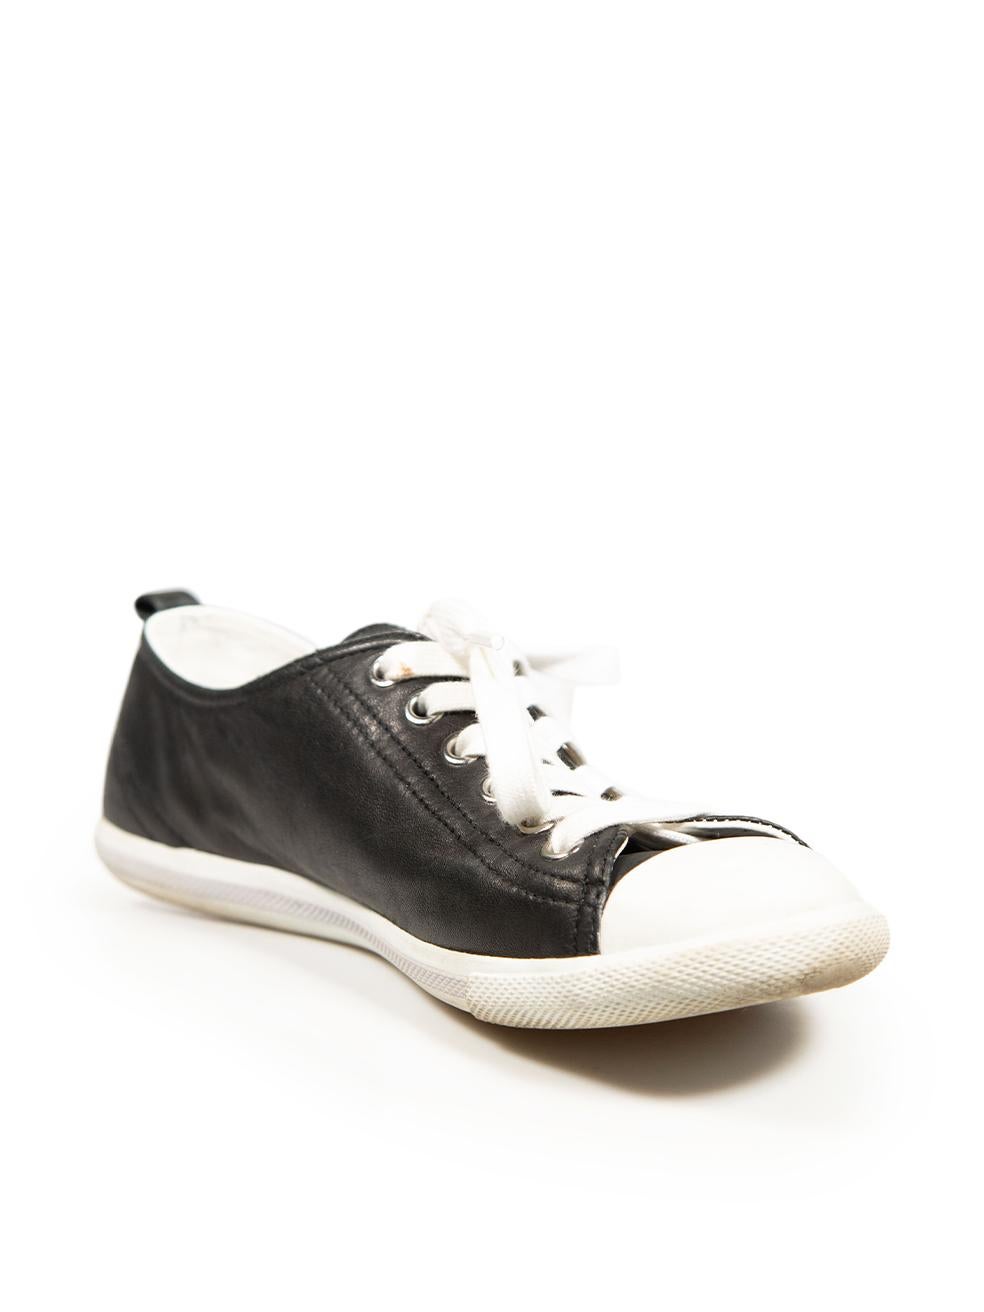 CONDITION is Very good. Minimal wear to trainers is evident. Minimal wear to white rubber sole of both shoes where scuffs is evident. A stain is visible to the left shoe lace on this used Prada Sports designer resale item. This item comes with